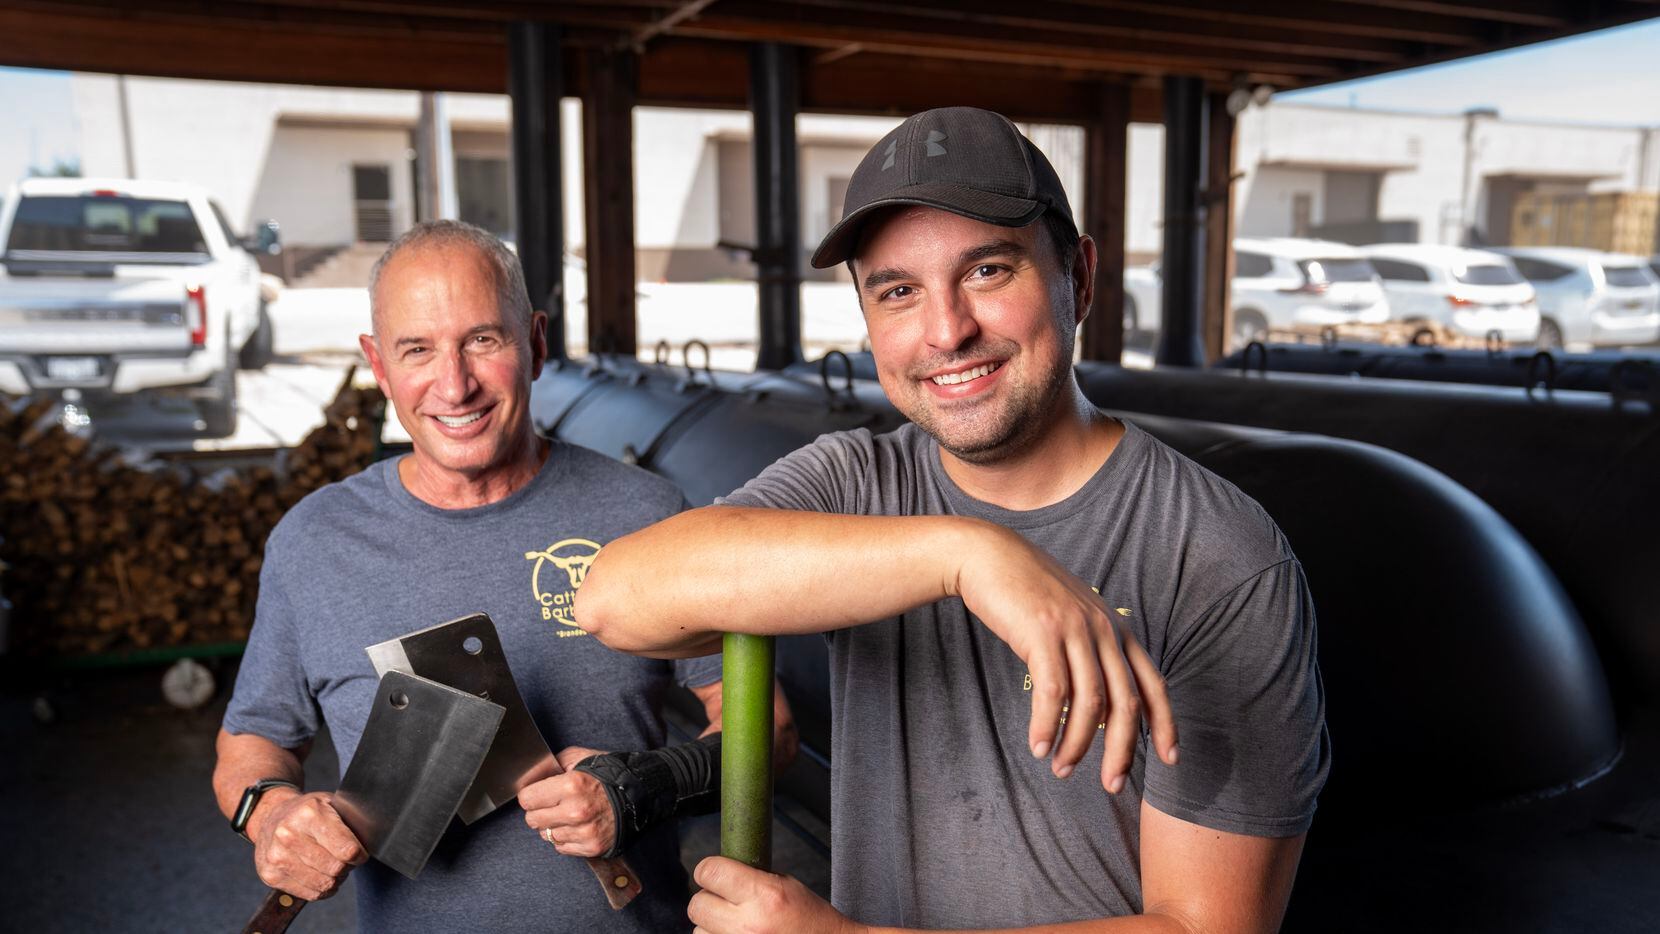 "When I started working here, [Cattleack founder Todd David] had a top 10 barbecue joint. I...